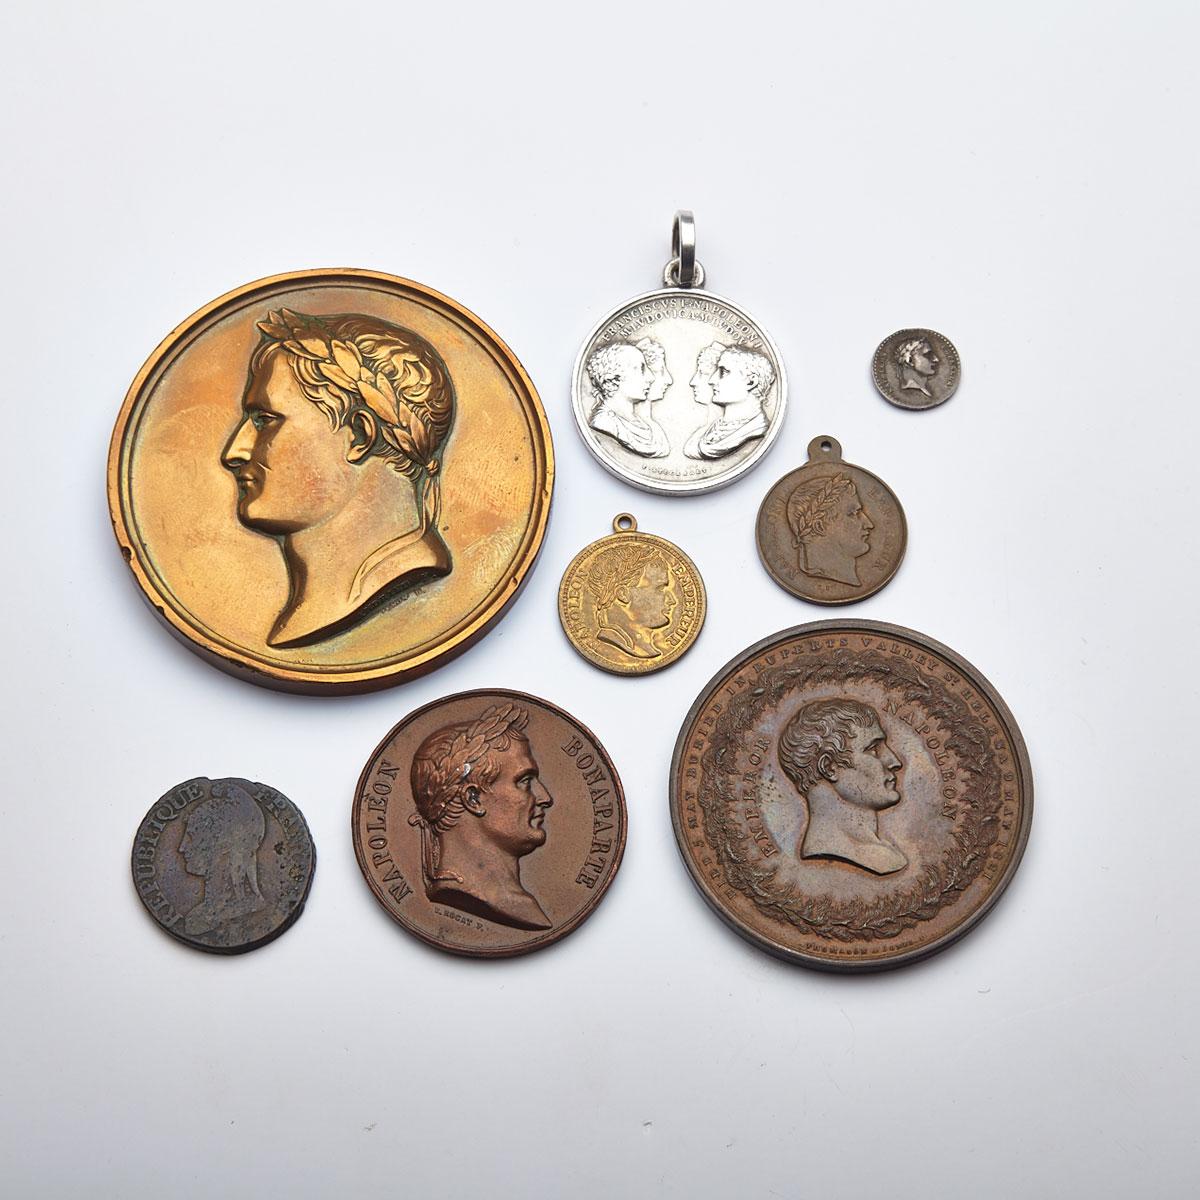 Eight Napoleonic Medallions and Coins, 19th century